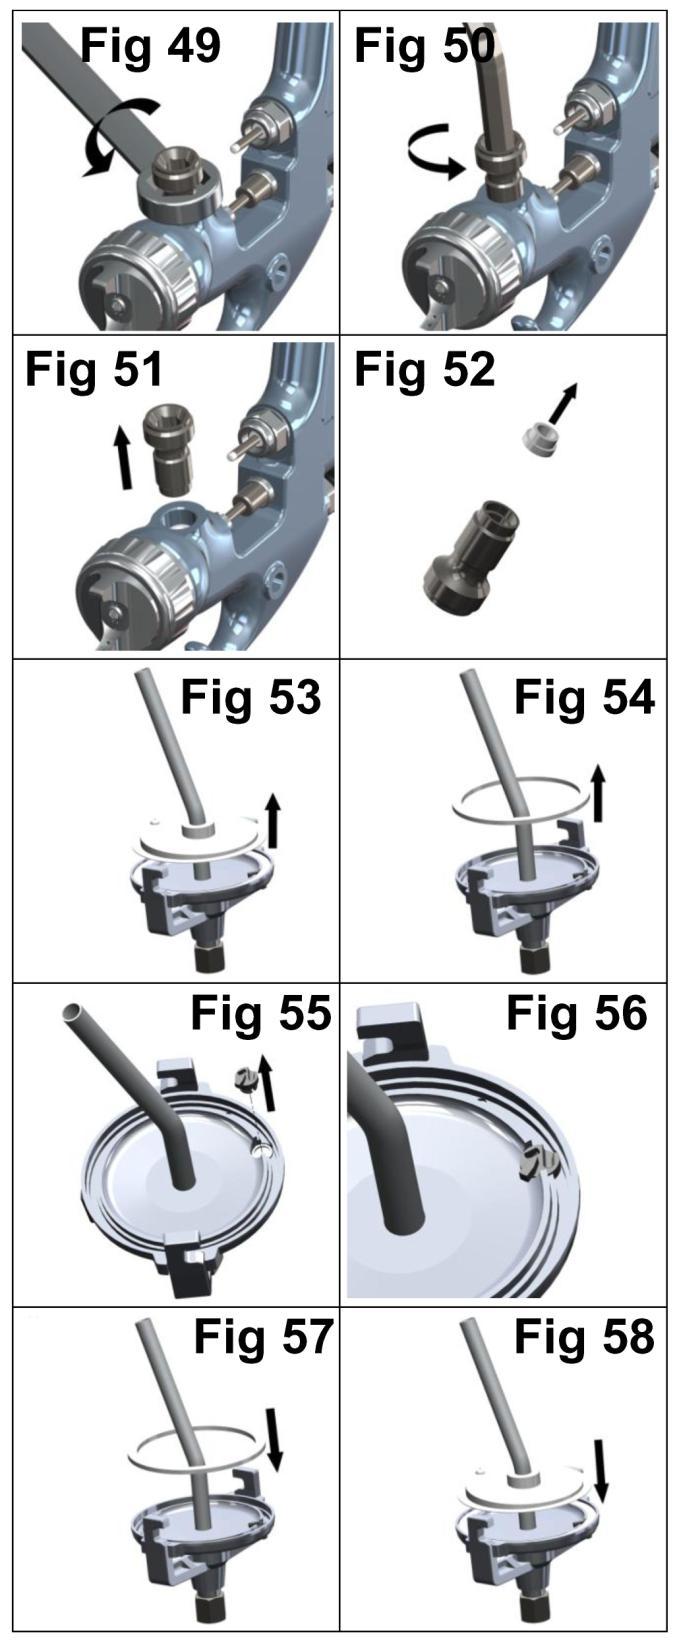 Parts Replacement/ Maintenance FLUID INLET SEAL 1. Loosen Locknut (55) with 18mm Spanner (see Fig 49). 2. Unscrew Fluid Inlet Adaptor (54) with 8mm Hex Key (see fig 50) 3.